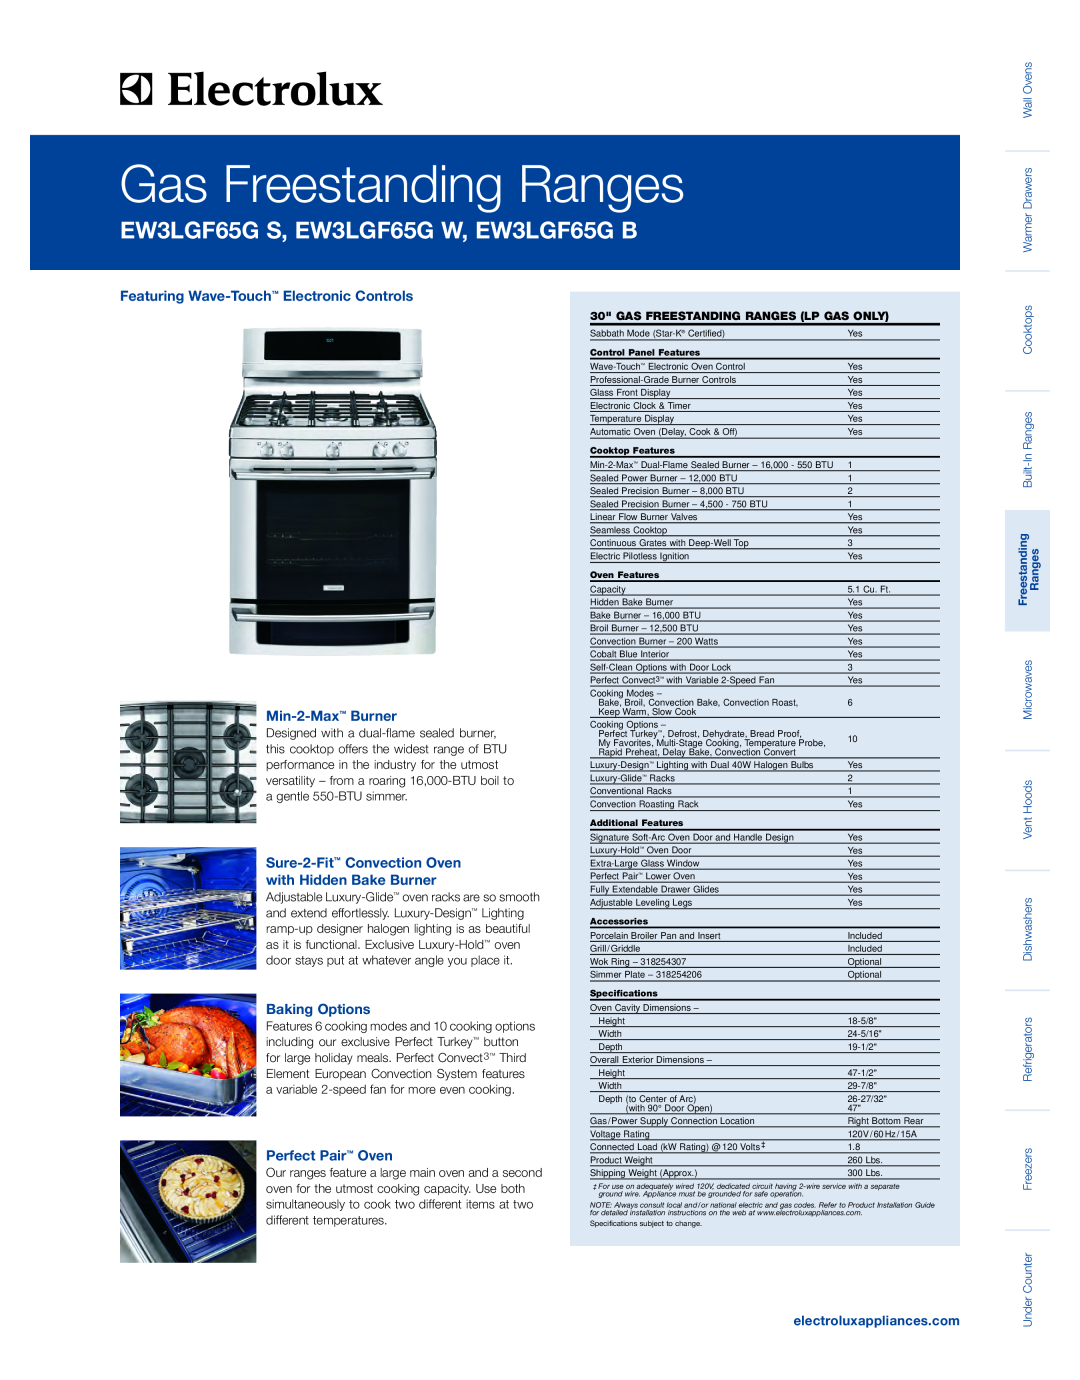 Electrolux EW3LGF65G B specifications Featuring Wave-Touch Electronic Controls, Min-2-Max Burner, Baking Options 